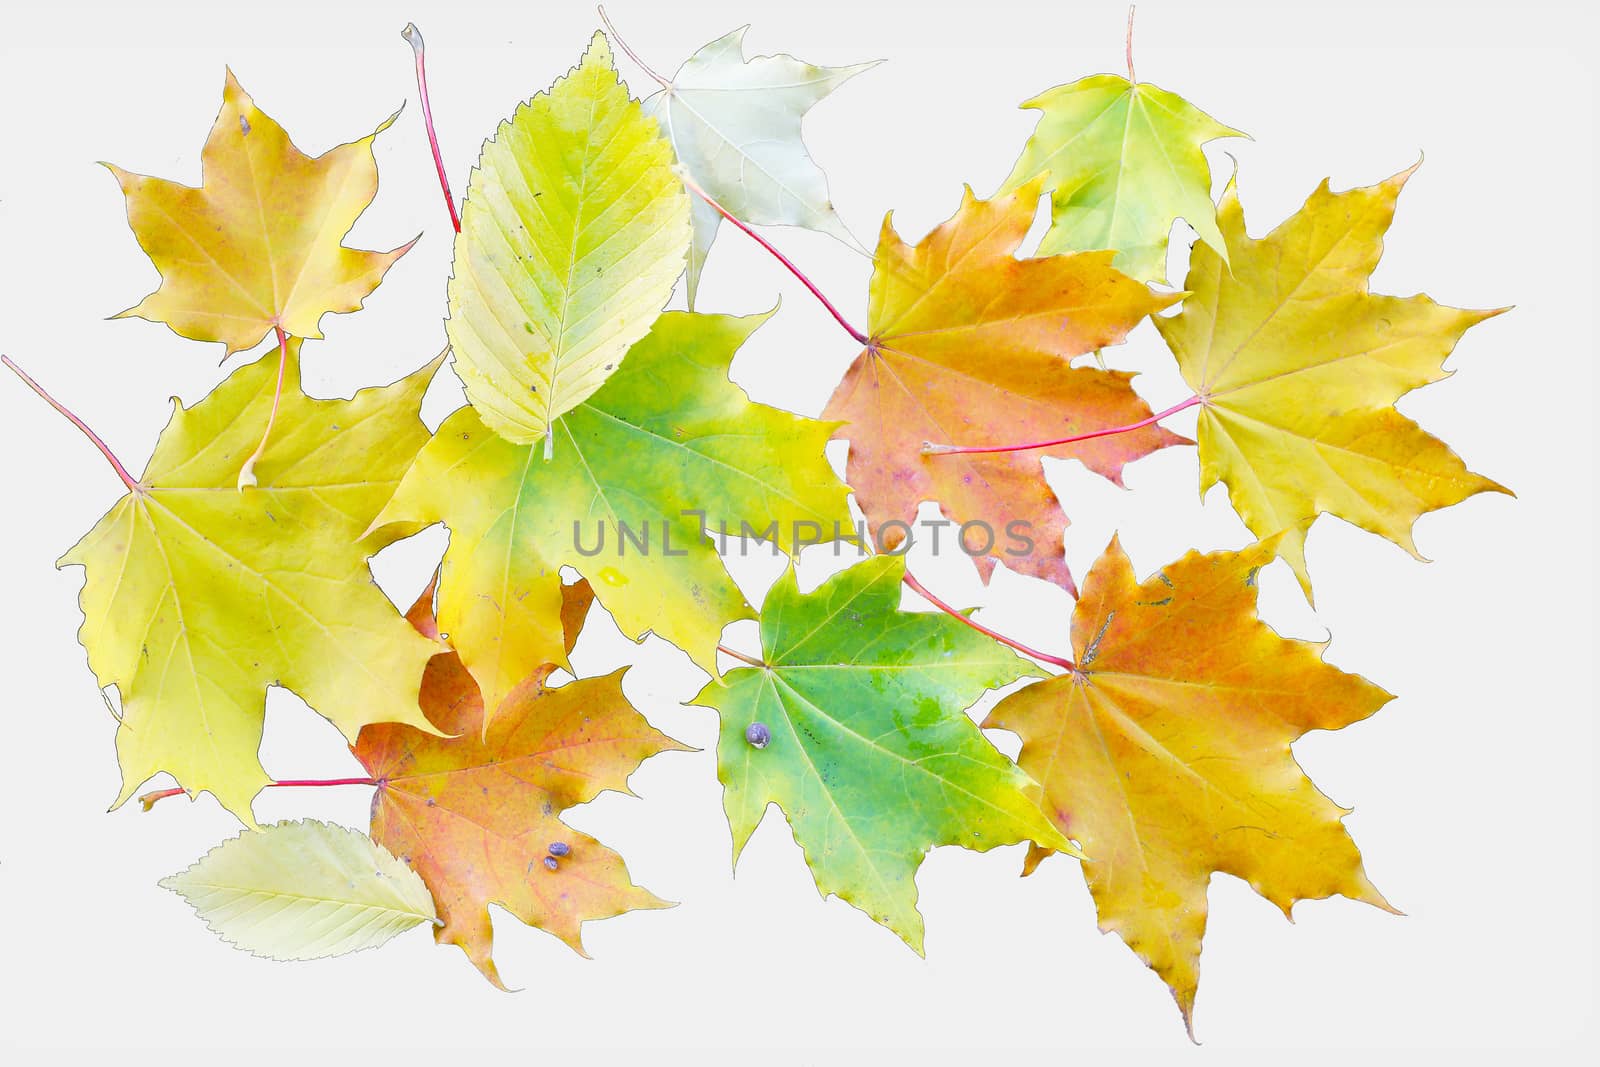 Group of autumn leaves of different colors on a white background.